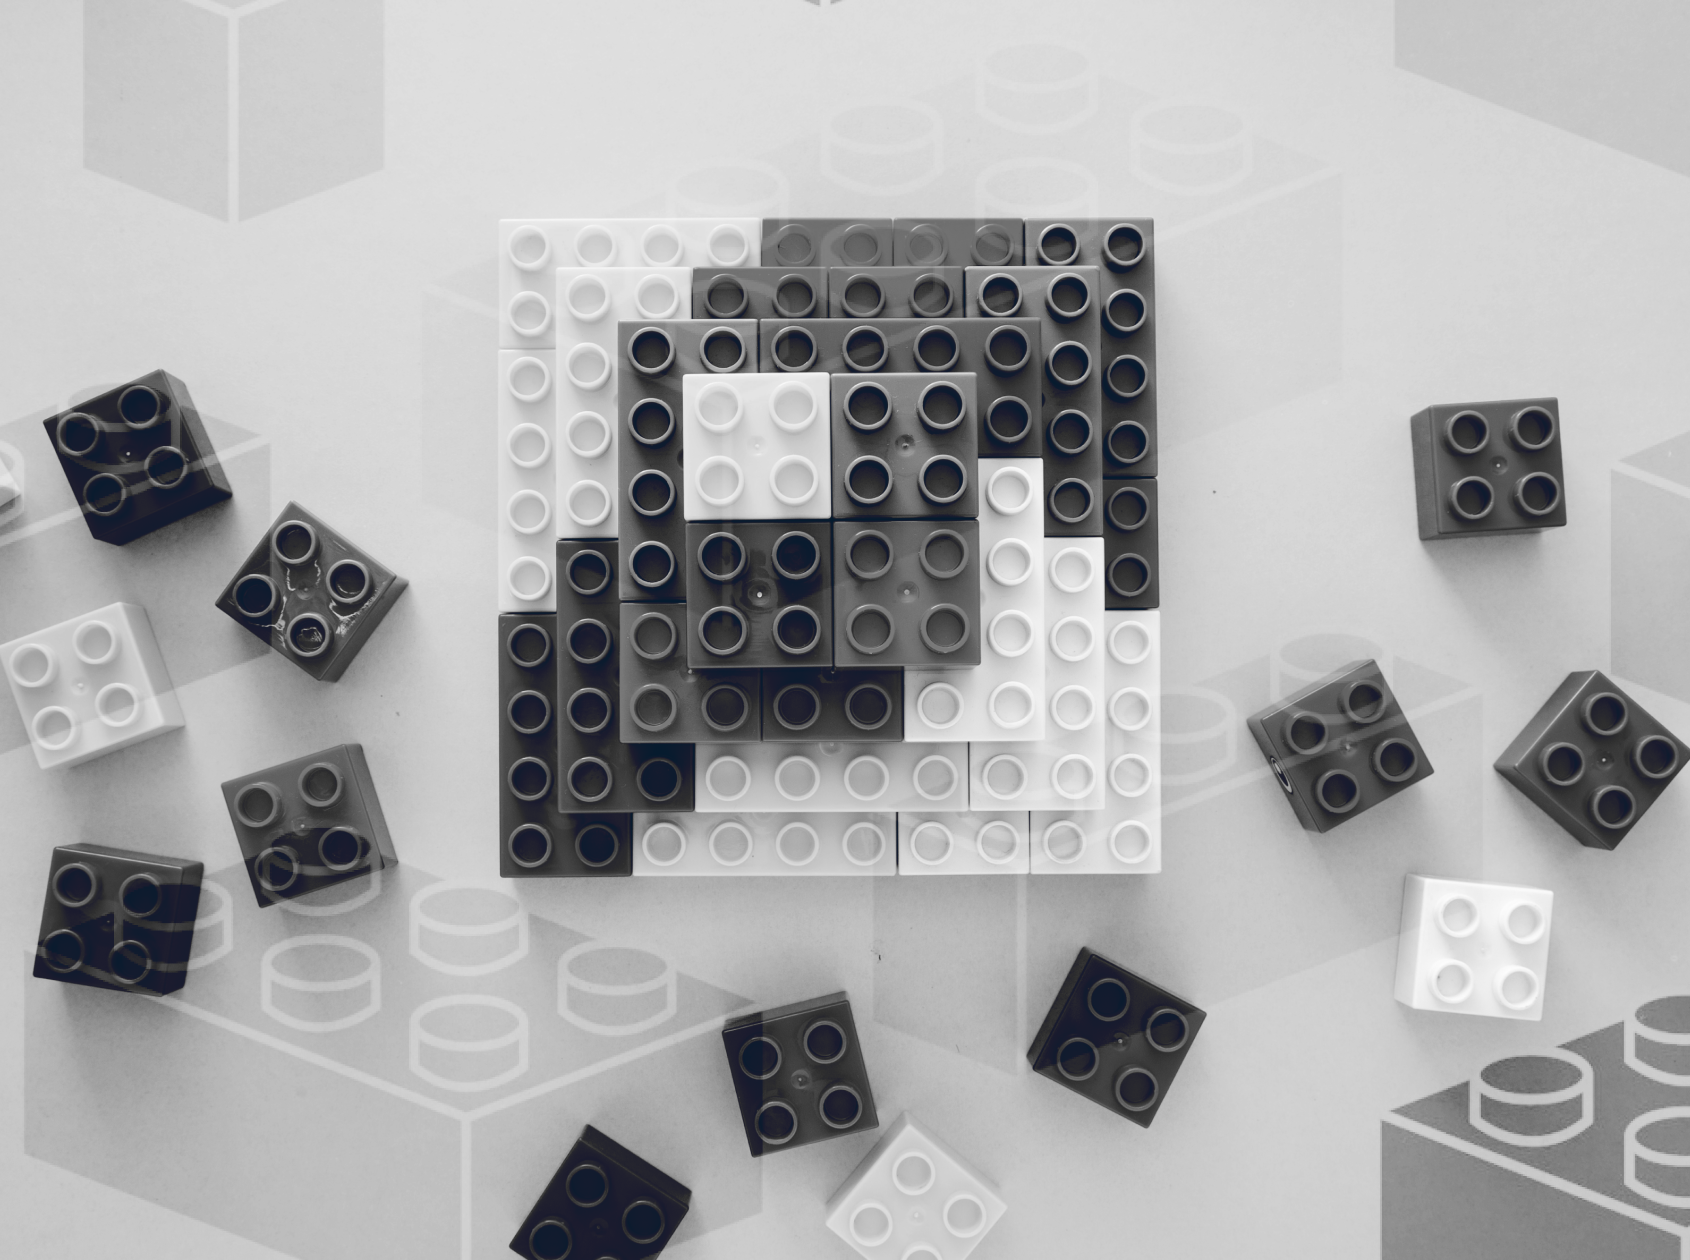 Monochrome image of various lego pieces scattered around a central square lego construction resembling the letter 'a'.